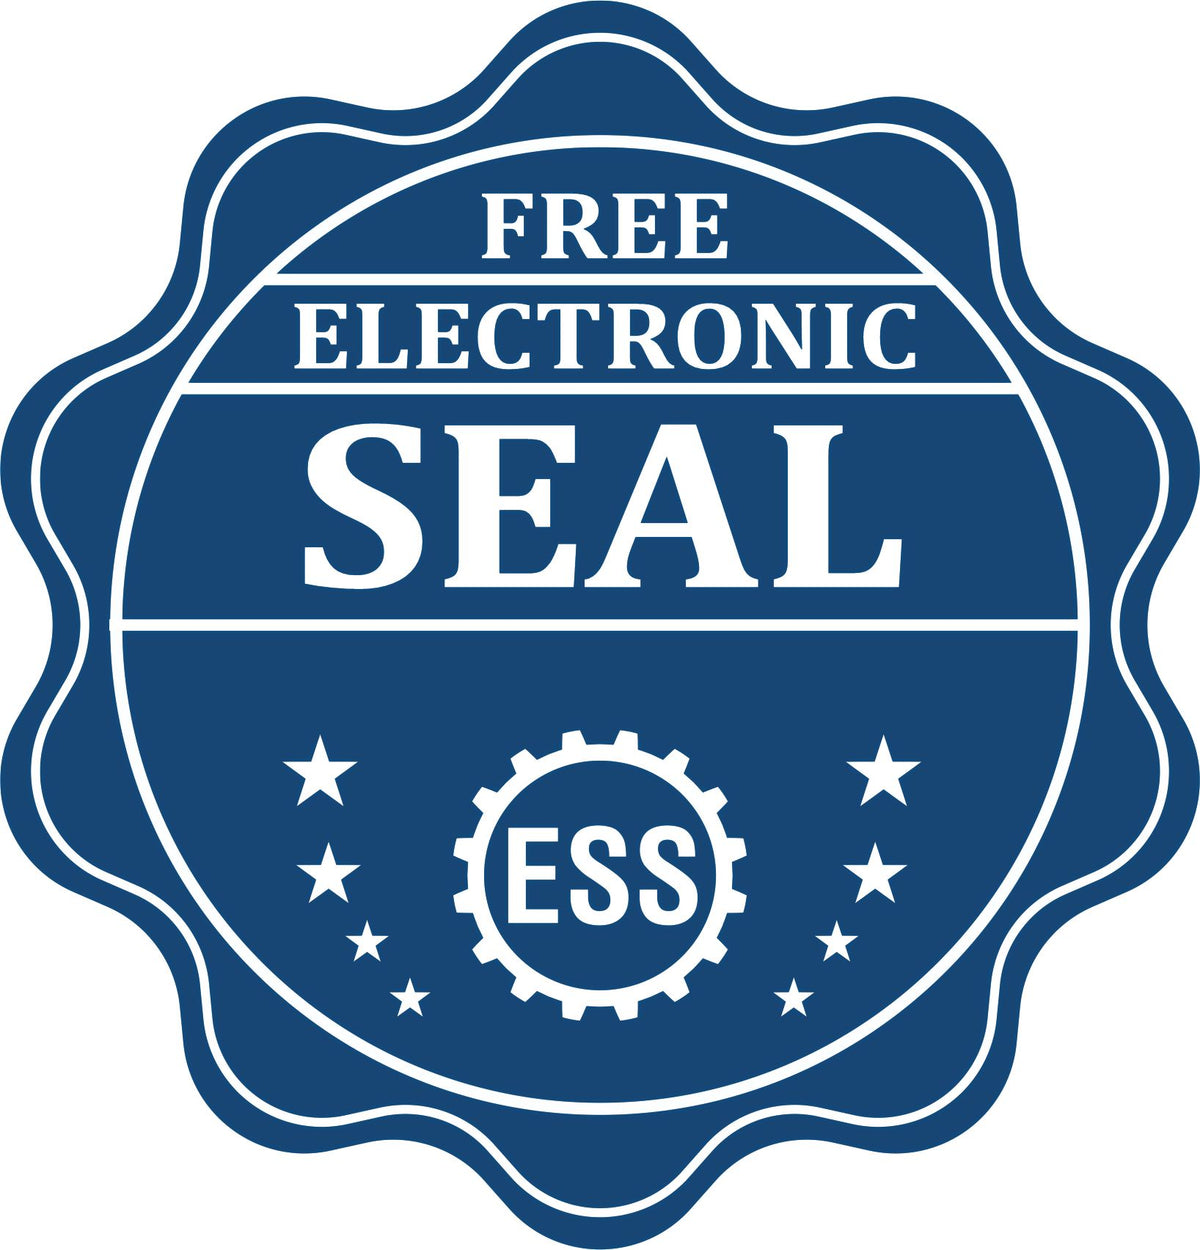 A badge showing a free electronic seal for the Premium MaxLight Pre-Inked Nebraska Landscape Architectural Stamp with stars and the ESS gear on the emblem.